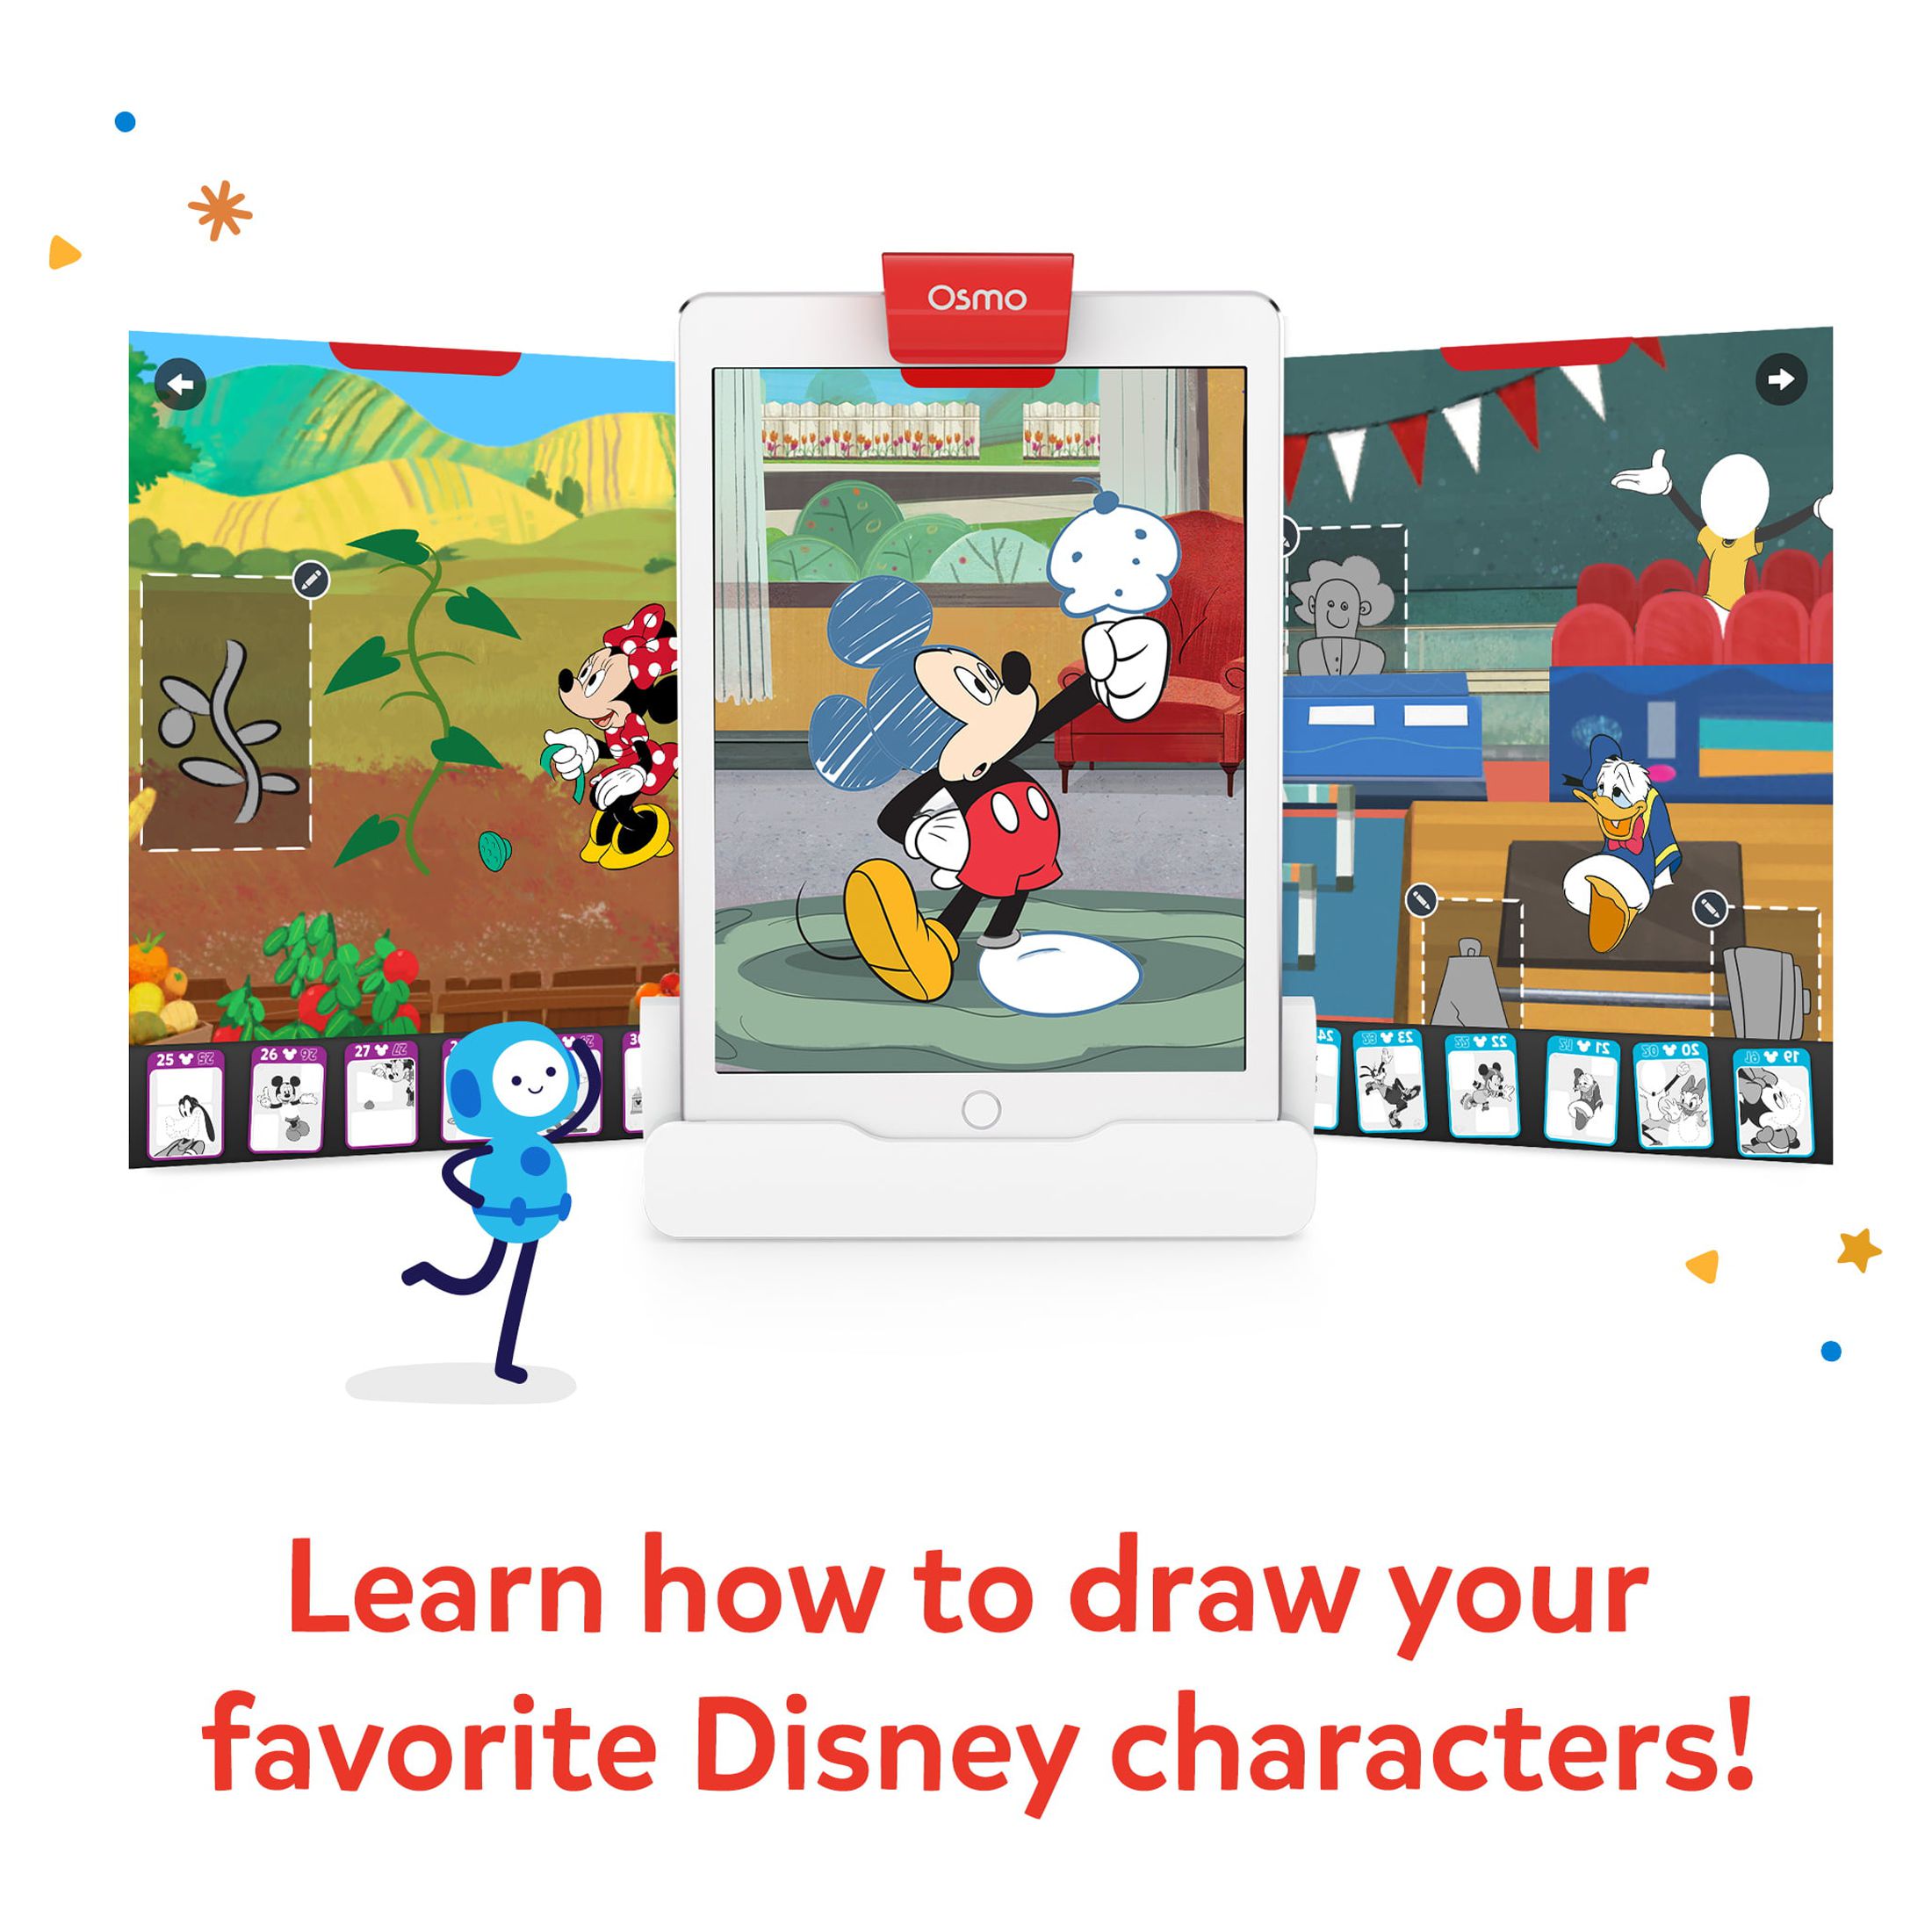 Osmo - Super Studio Disney Mickey Mouse & Friends Starter Kit - Age 6-12 - Learn Disney Drawings, 100+ Cartoon Drawings, Erasable Drawing Board, Sketchbook, Drawing Pad, Art Sets, STEM Educational Toy - image 5 of 8